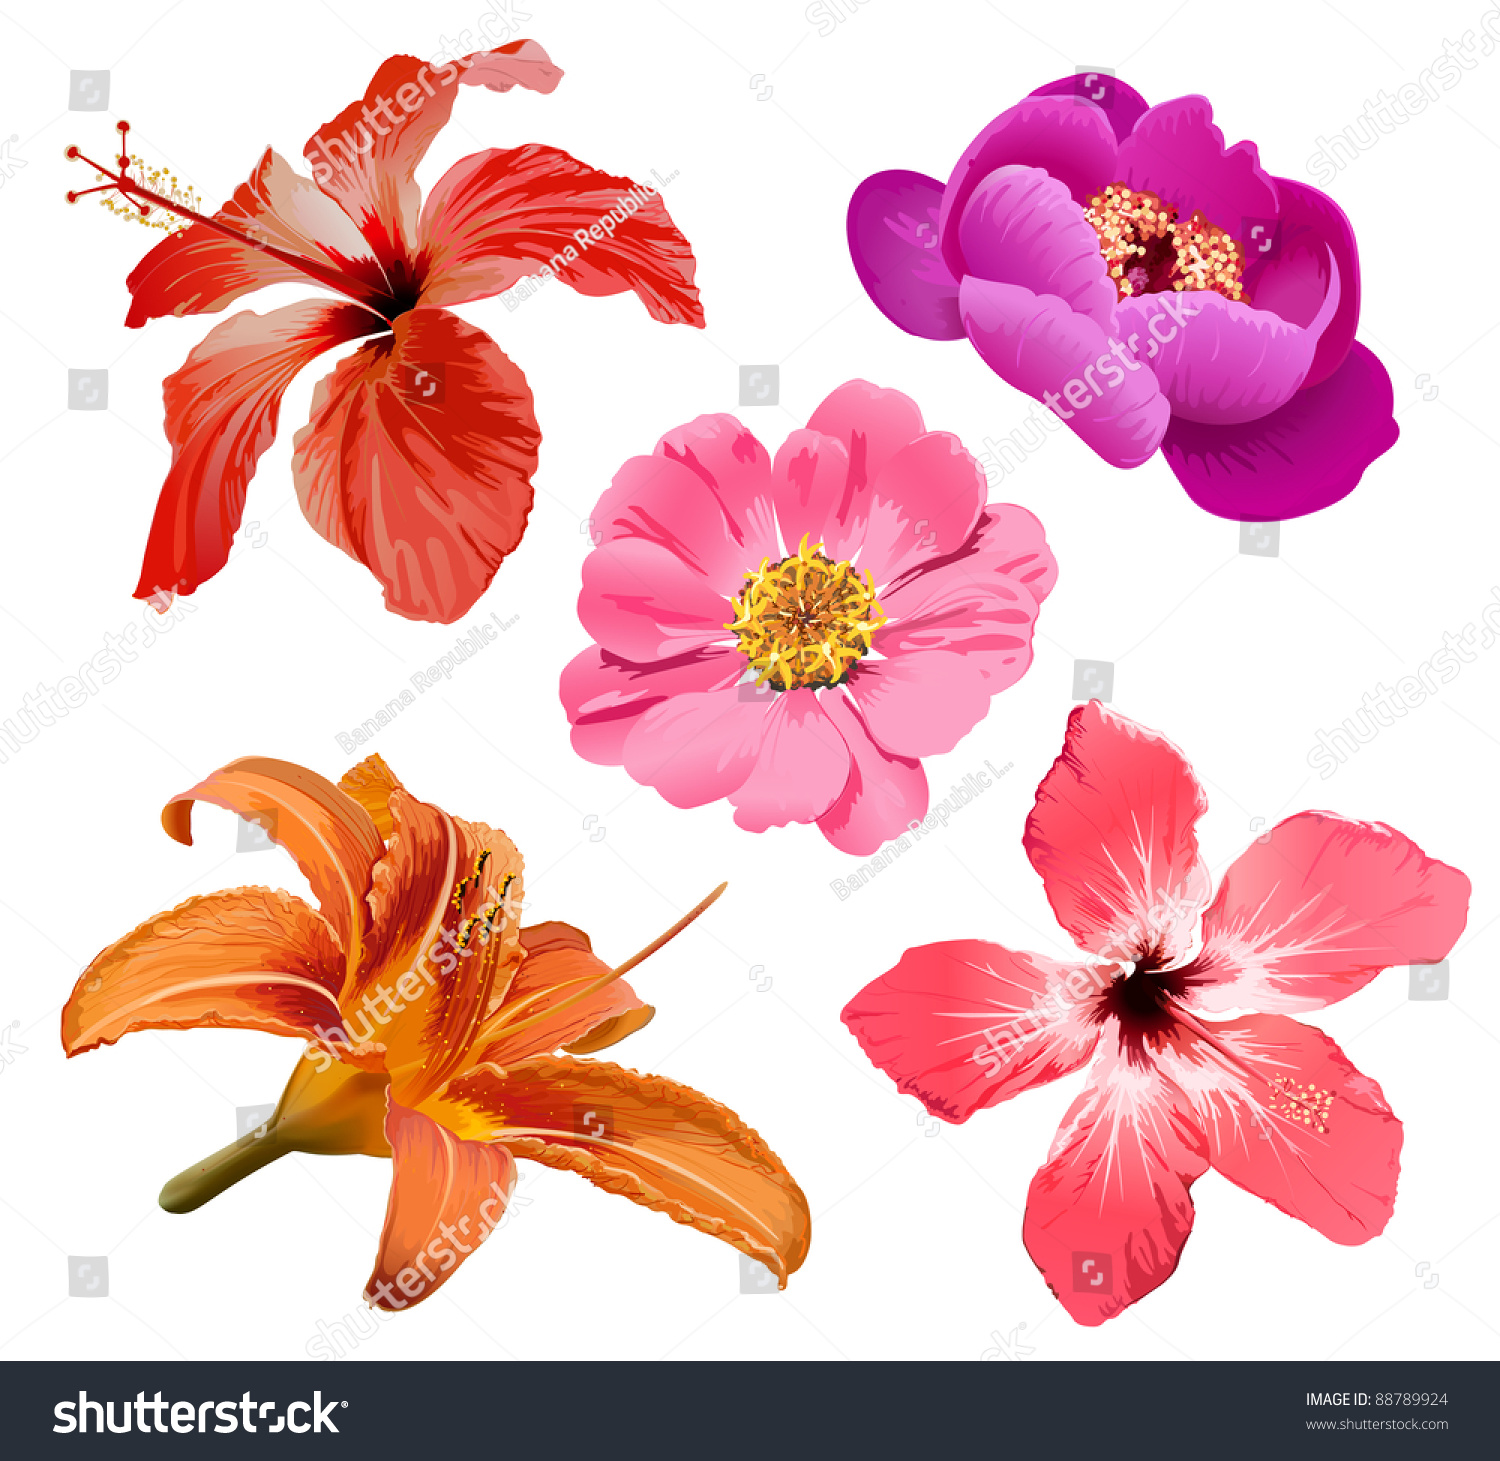 Tropical Flower, Exotic Hibiscus Stock Vector Illustration 88789924